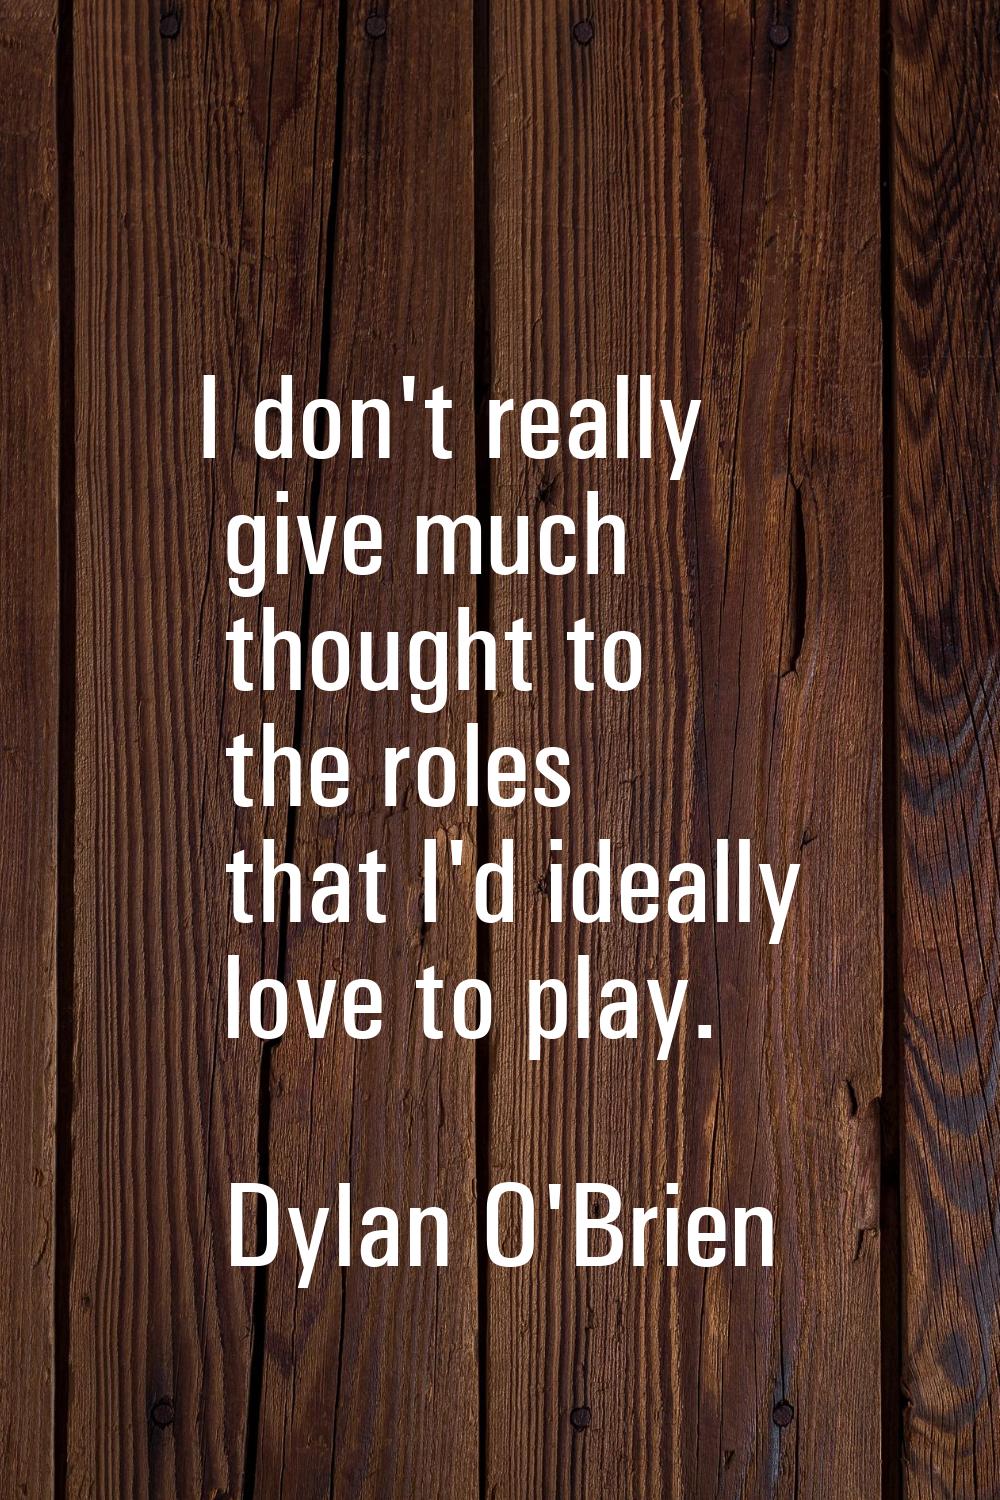 I don't really give much thought to the roles that I'd ideally love to play.